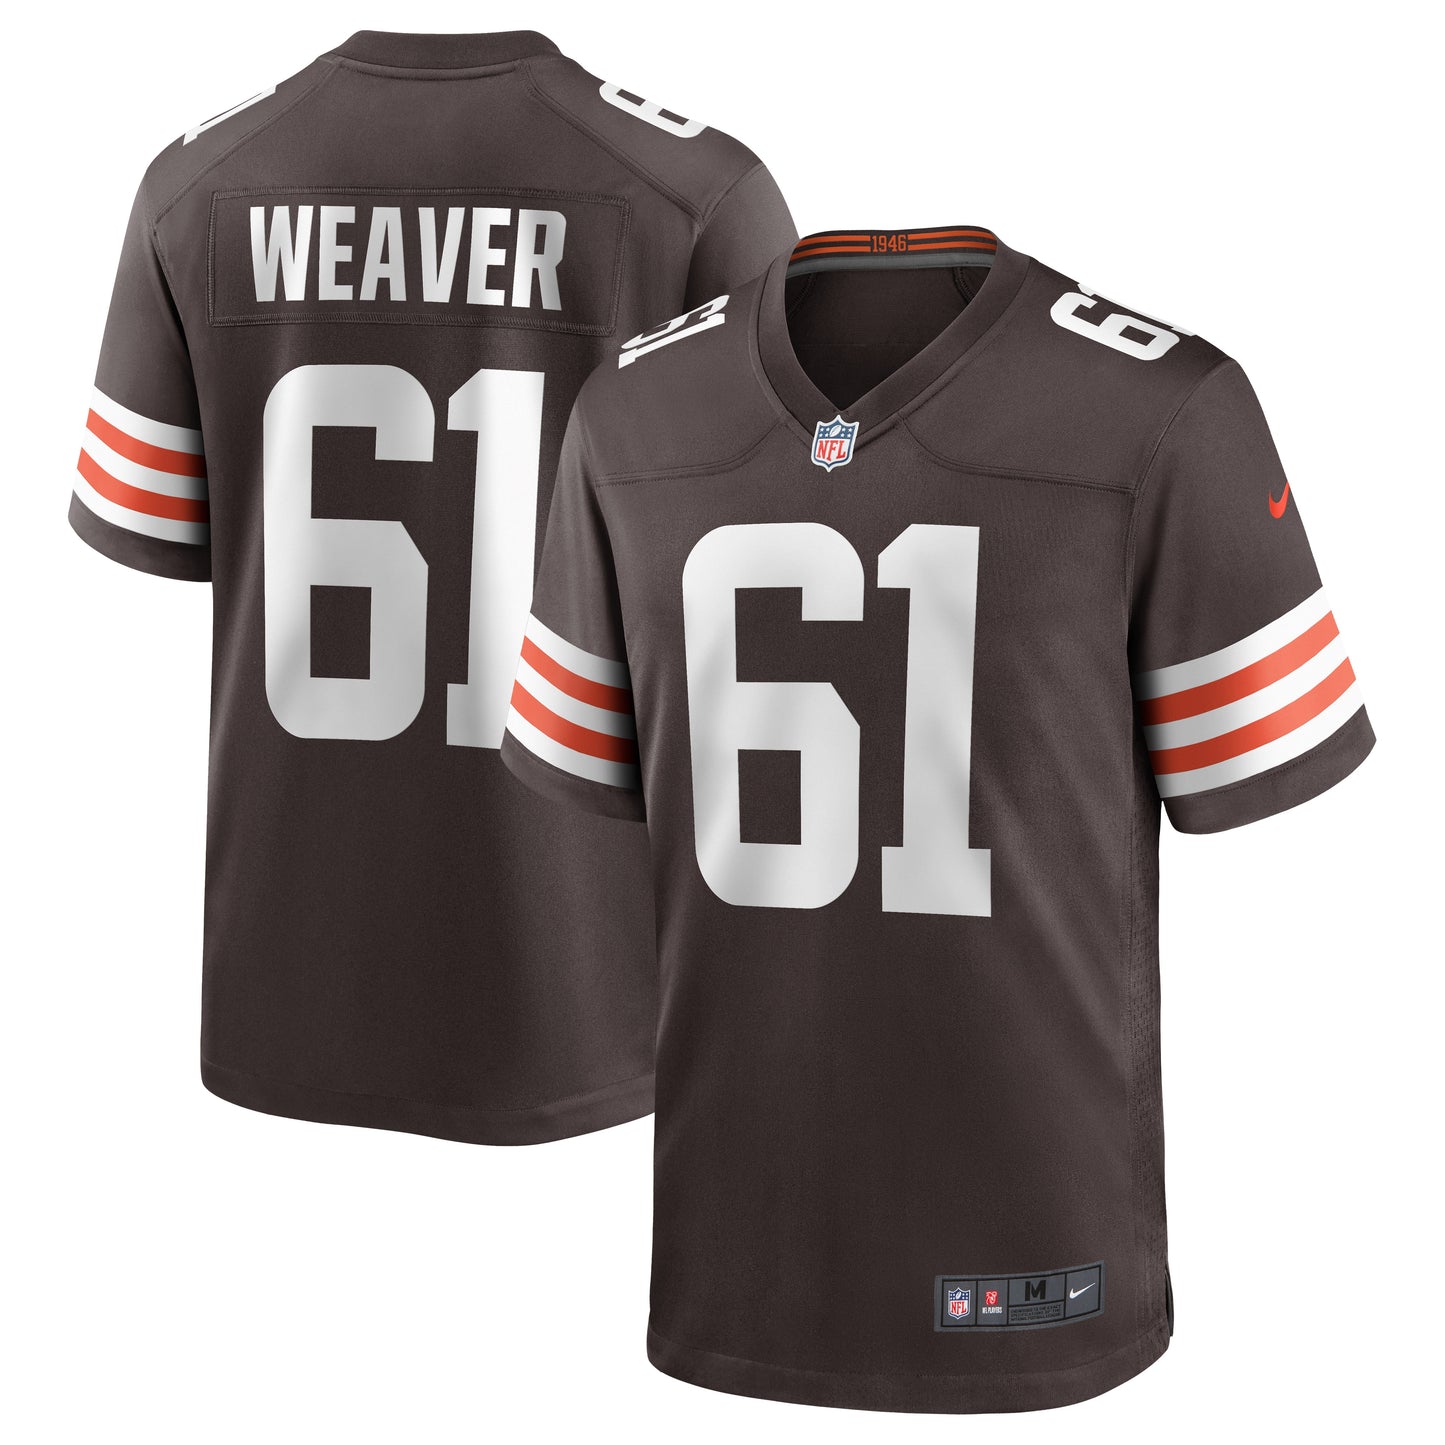 Curtis Weaver Cleveland Browns Nike Game Jersey - Brown